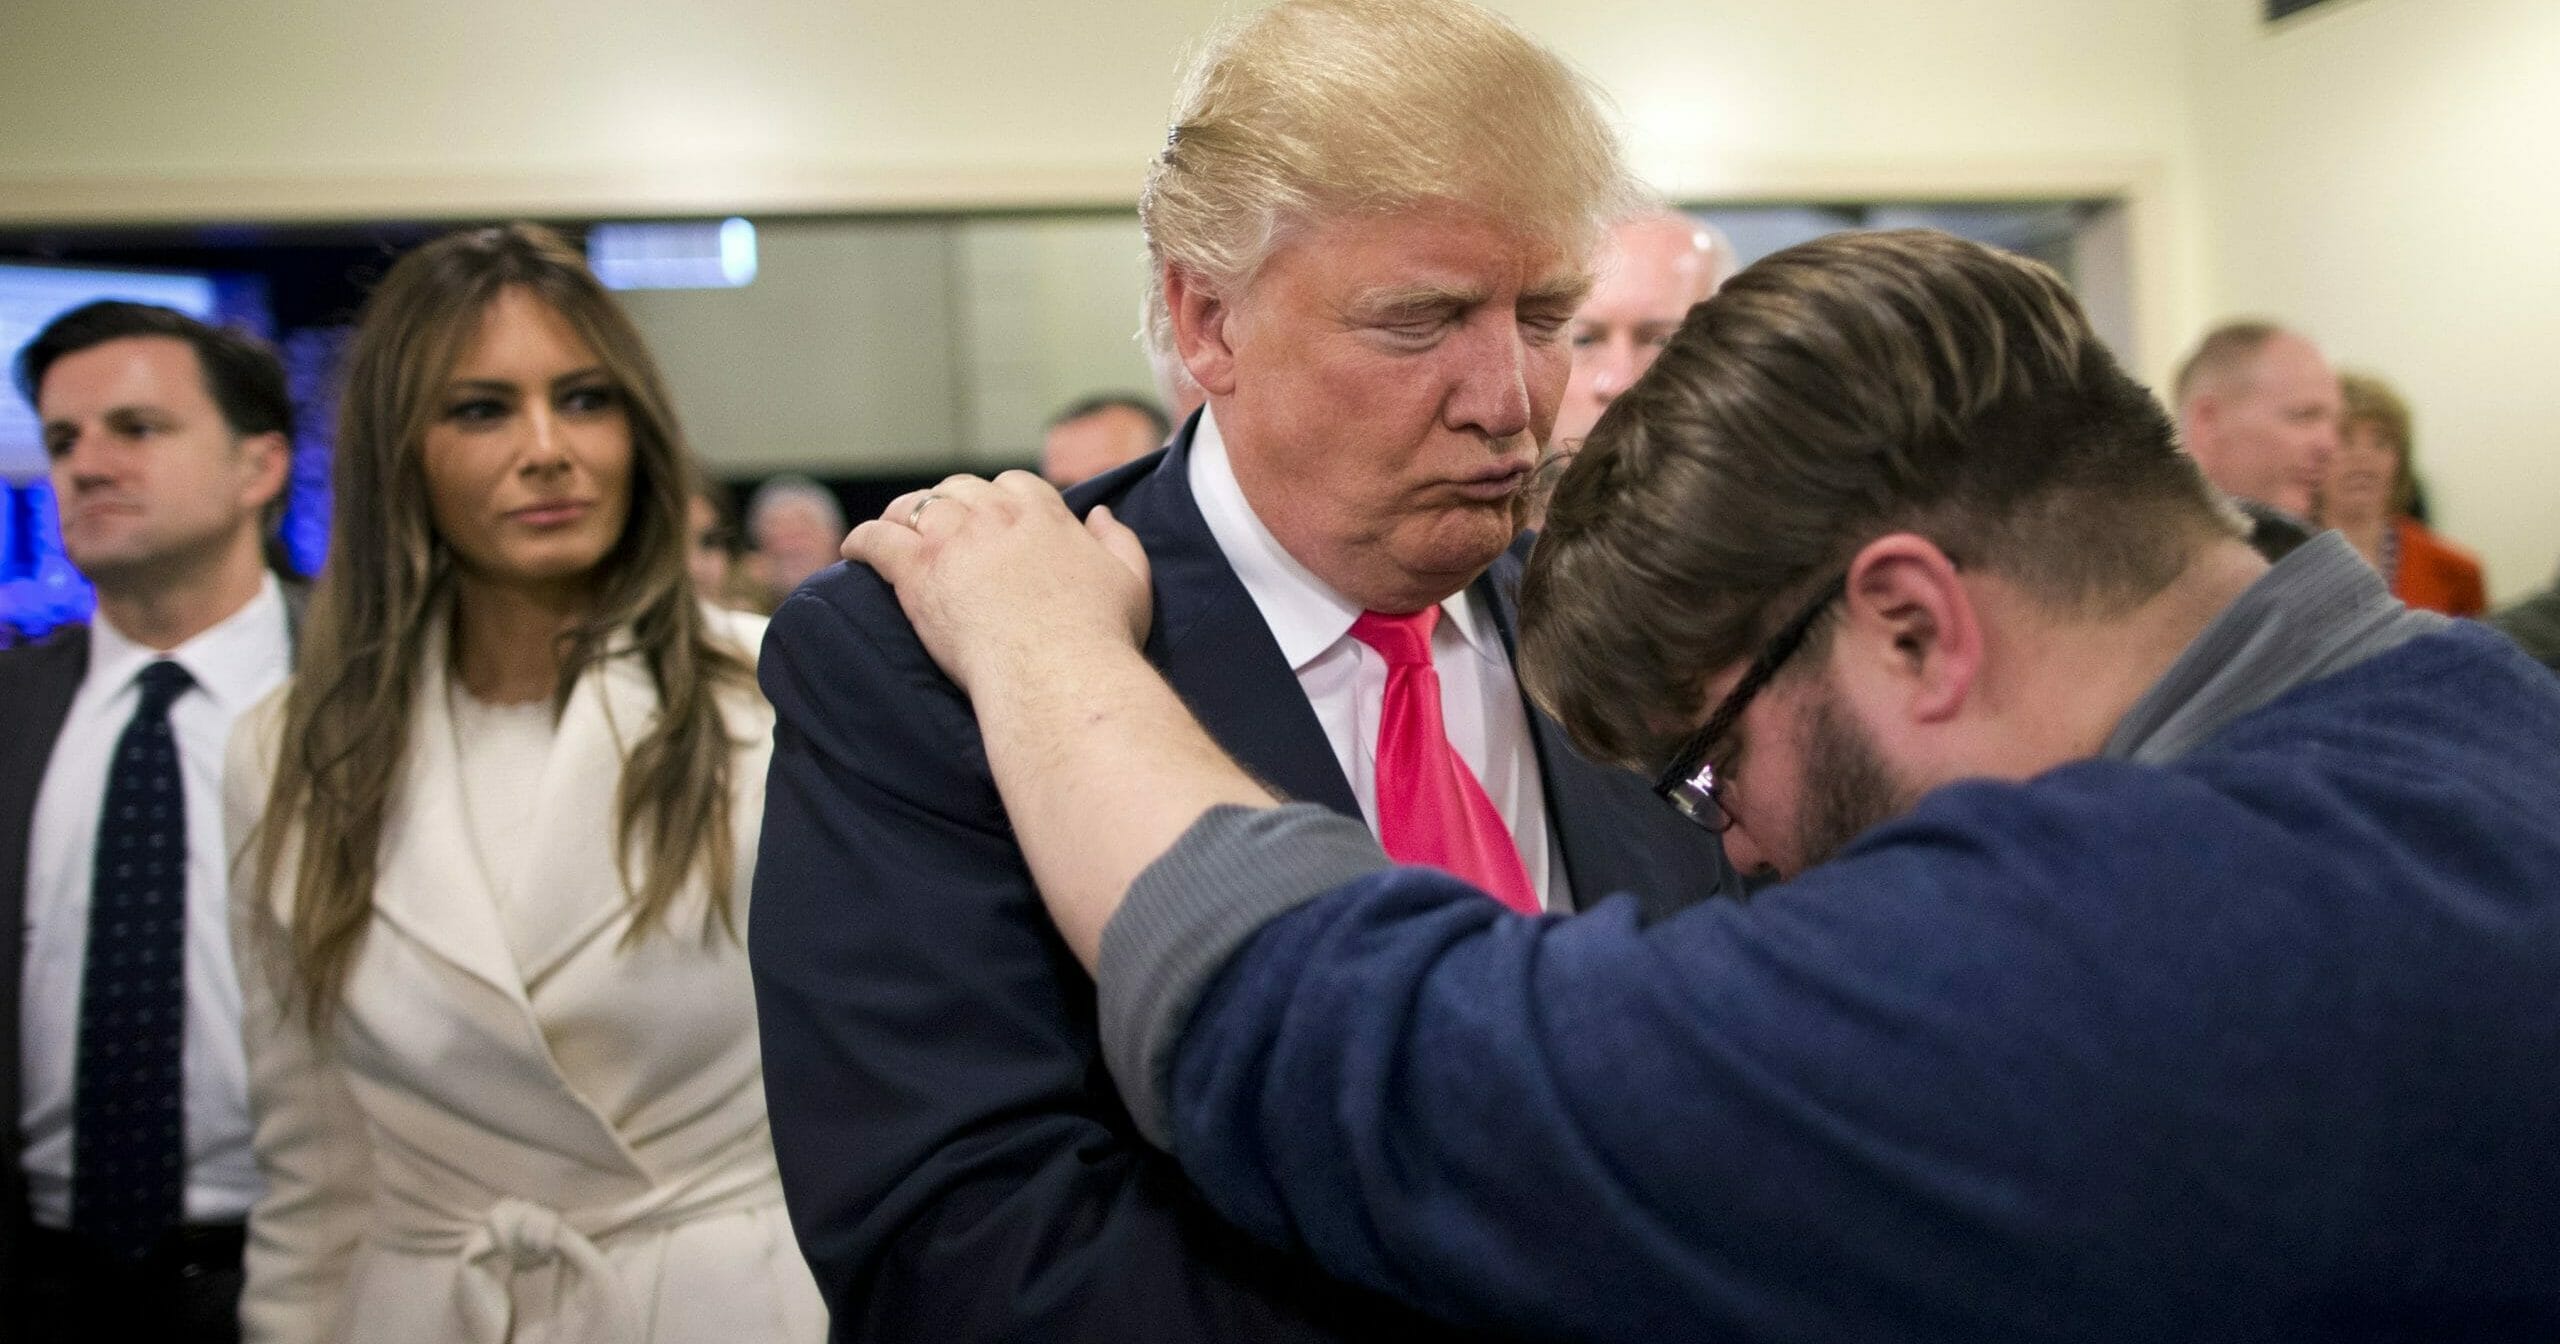 In this Jan. 31, 2016, file photo, Pastor Joshua Nink, right, prays for then-Republican presidential candidate Donald Trump, as his wife, Melania, left, watches after a Sunday service at First Christian Church in Council Bluffs, Iowa. In his first campaign move of the 2020 election year, President Donald Trump on Friday will launch a coalition of evangelicals as he aims to shore up and expand support from an influential piece of his political base.